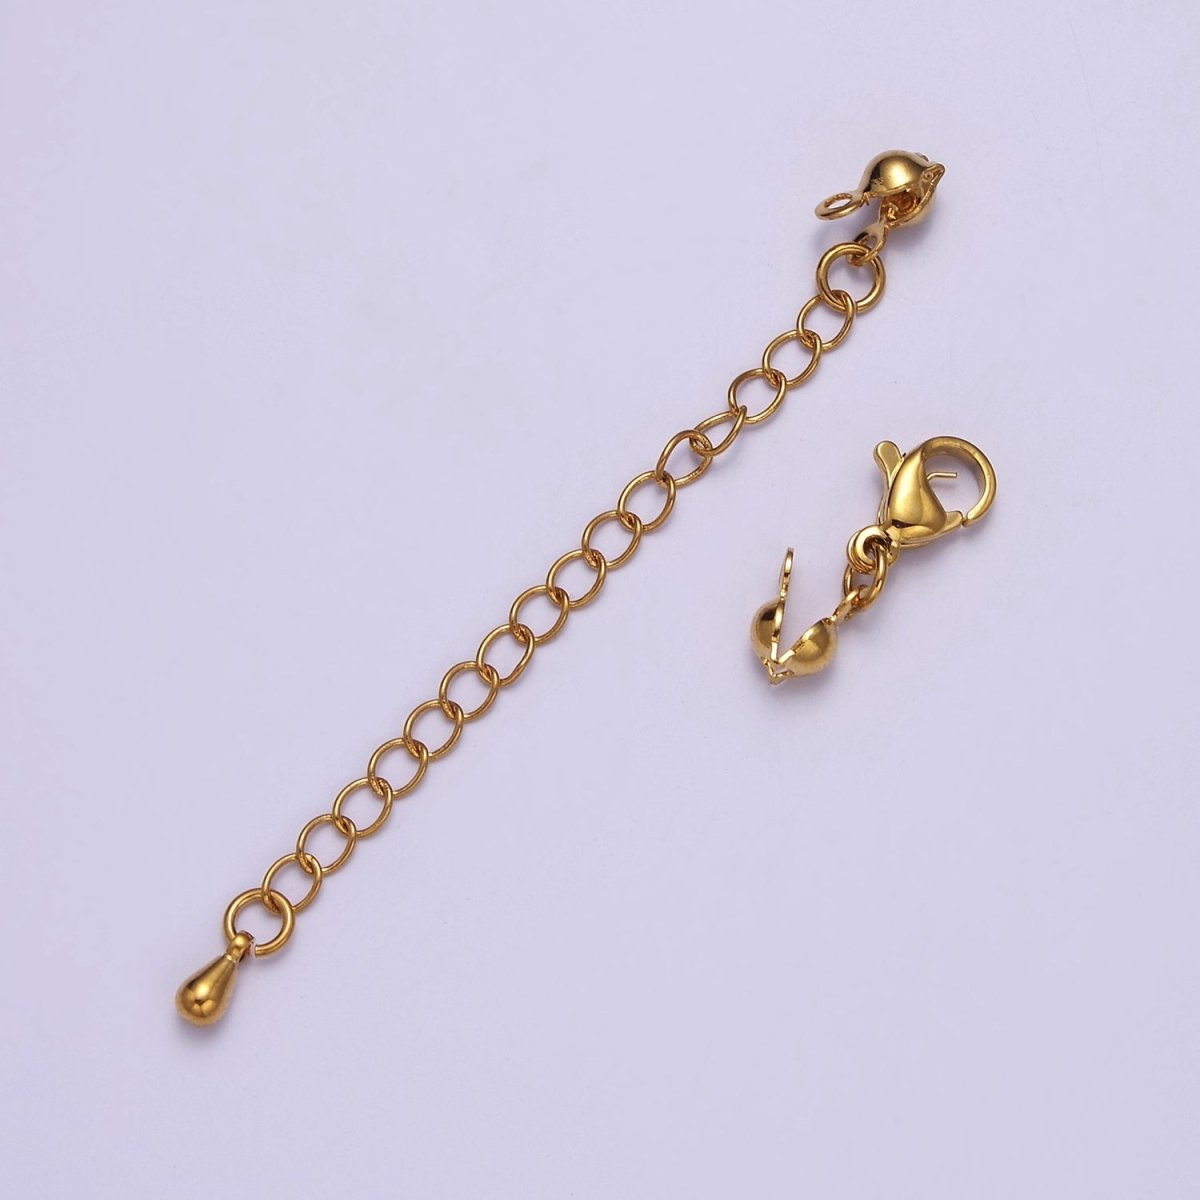 24K Gold Filled Chain Extender & Lobster Clasps Closure & Clamshell Crimp Knot Cover Jewelry Supply Set L-721 - DLUXCA